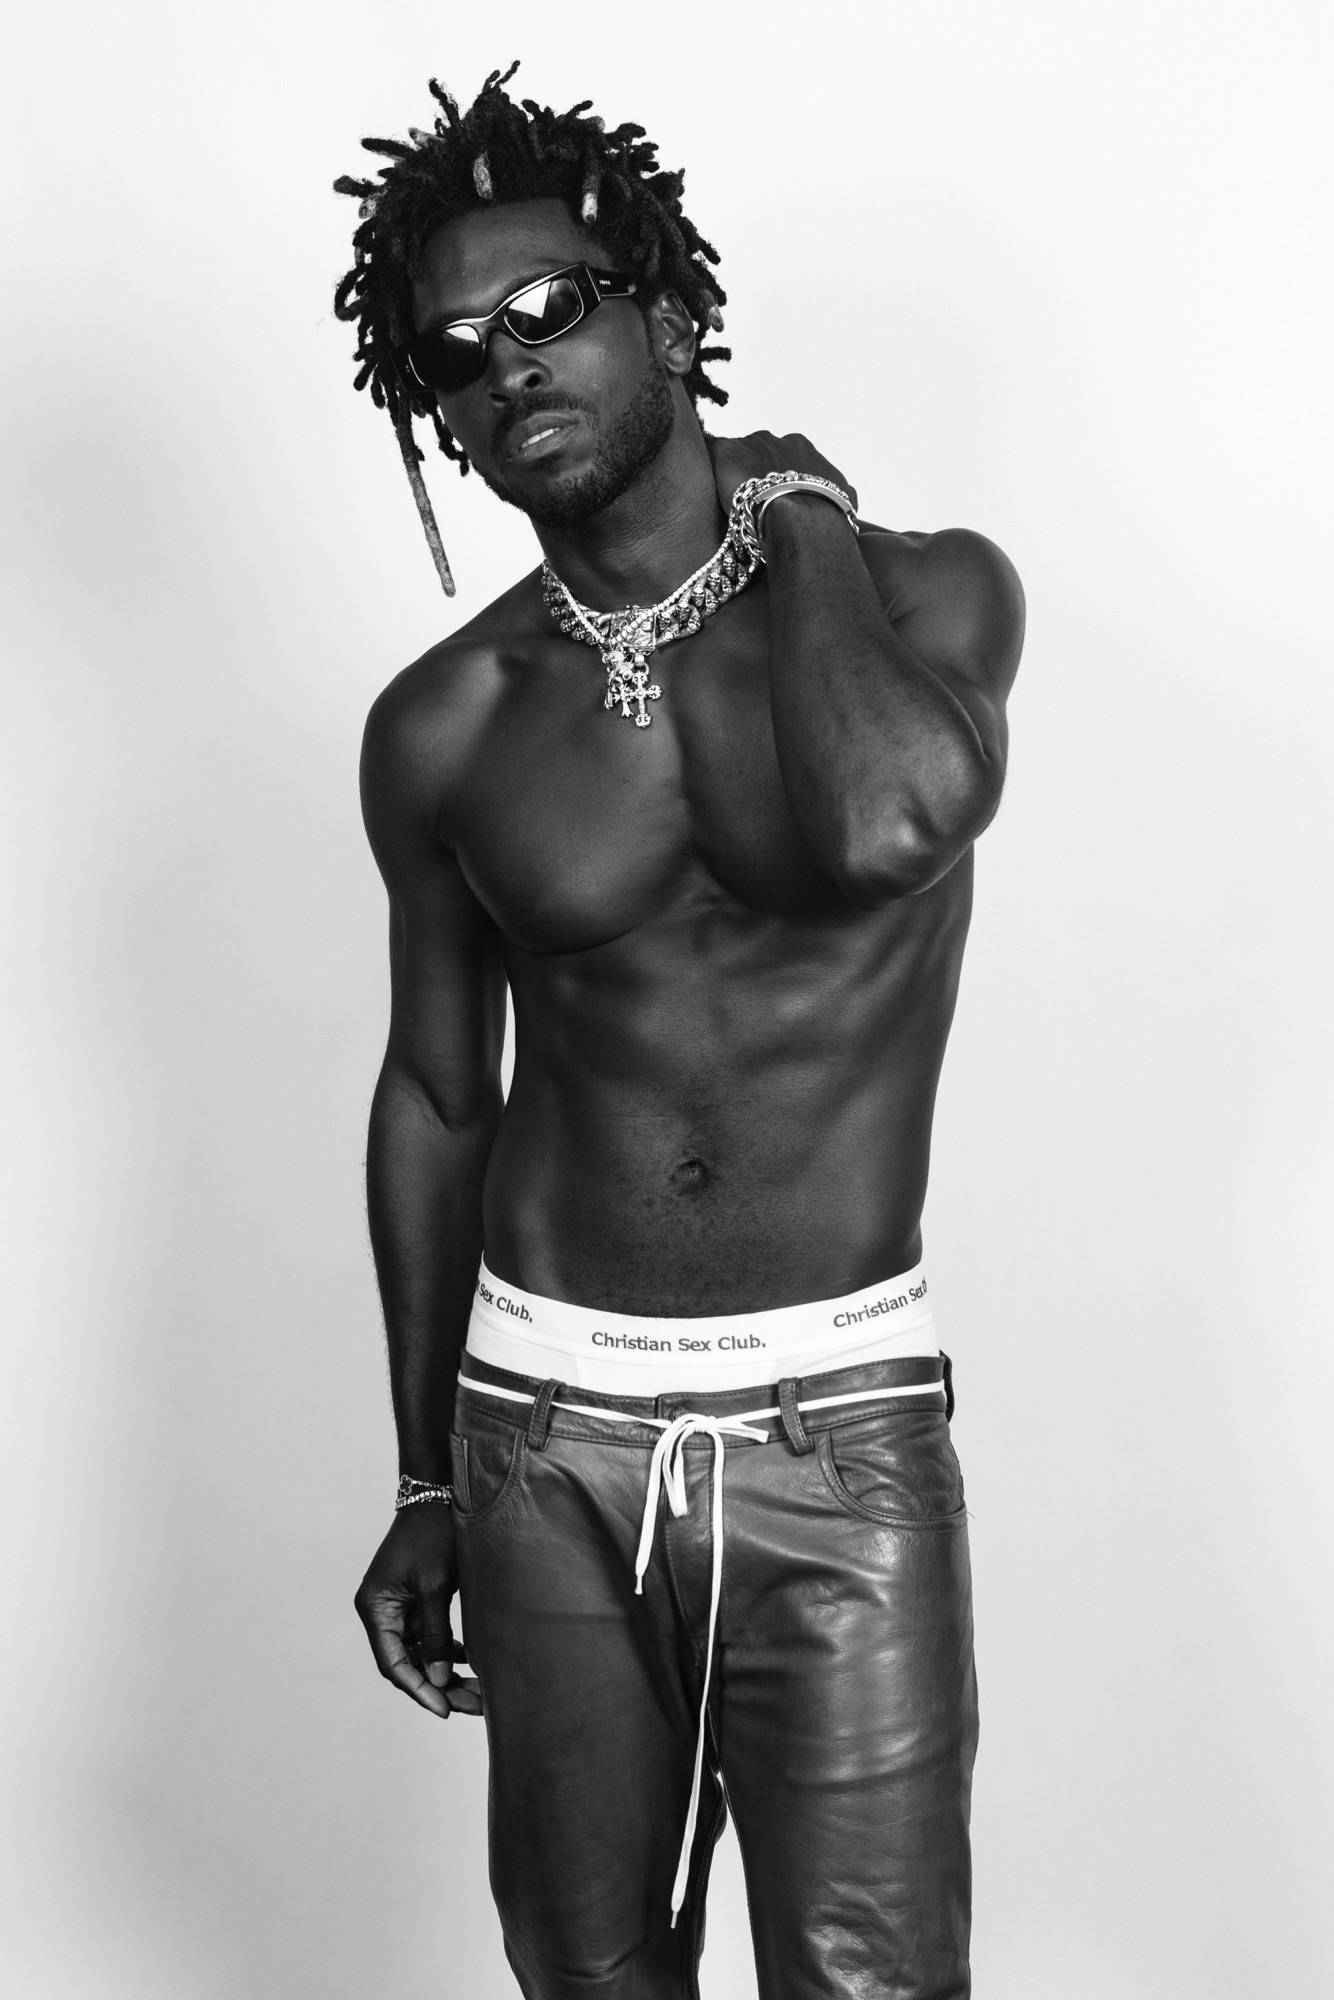 Saint Jhn On His Personal Music: 'The Fractured Child Became A